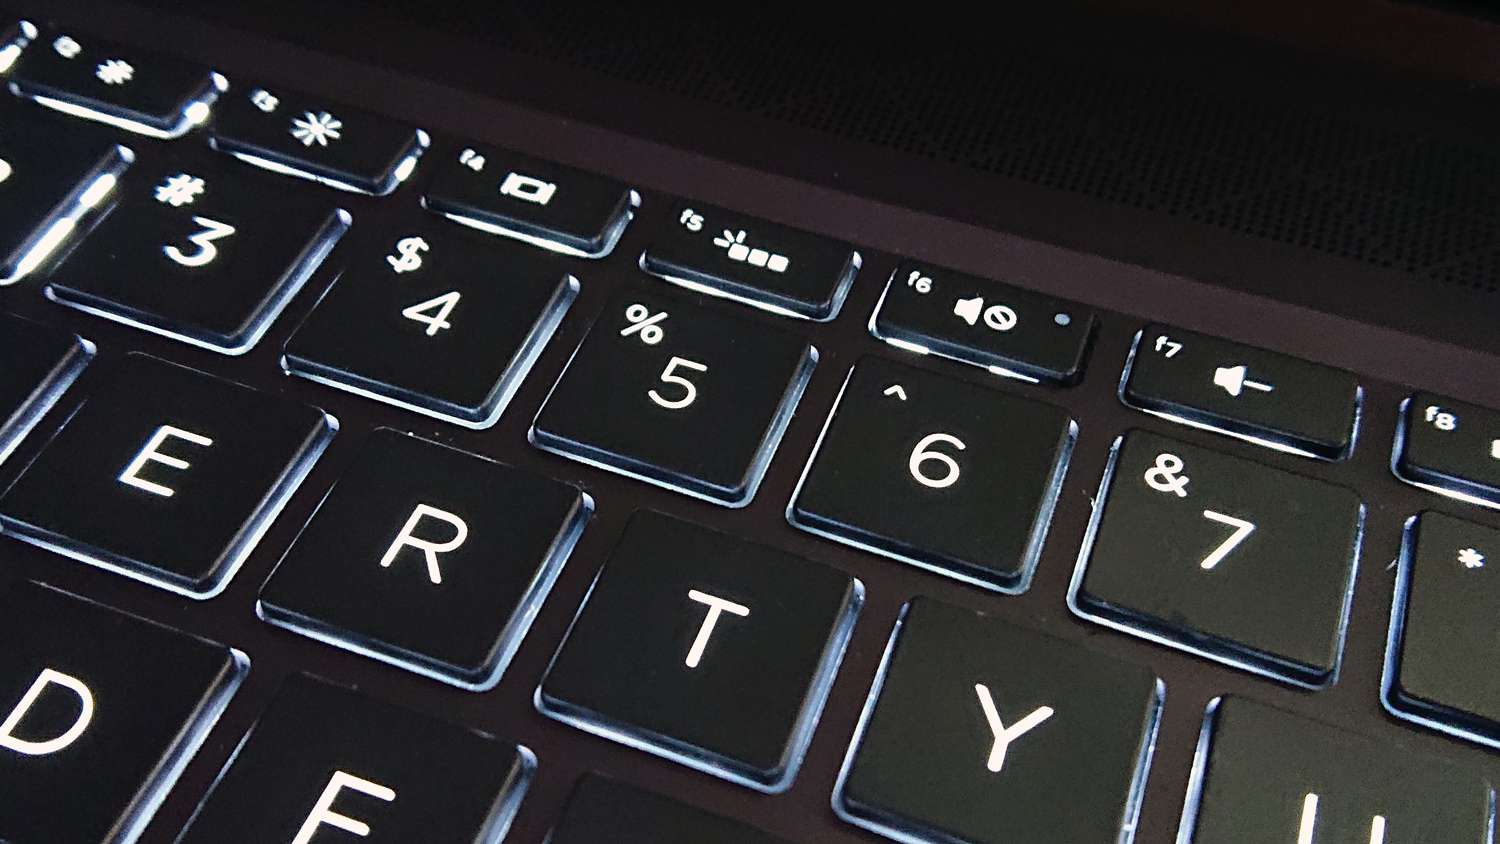 How To Turn On Keyboard Light On Hp Laptop